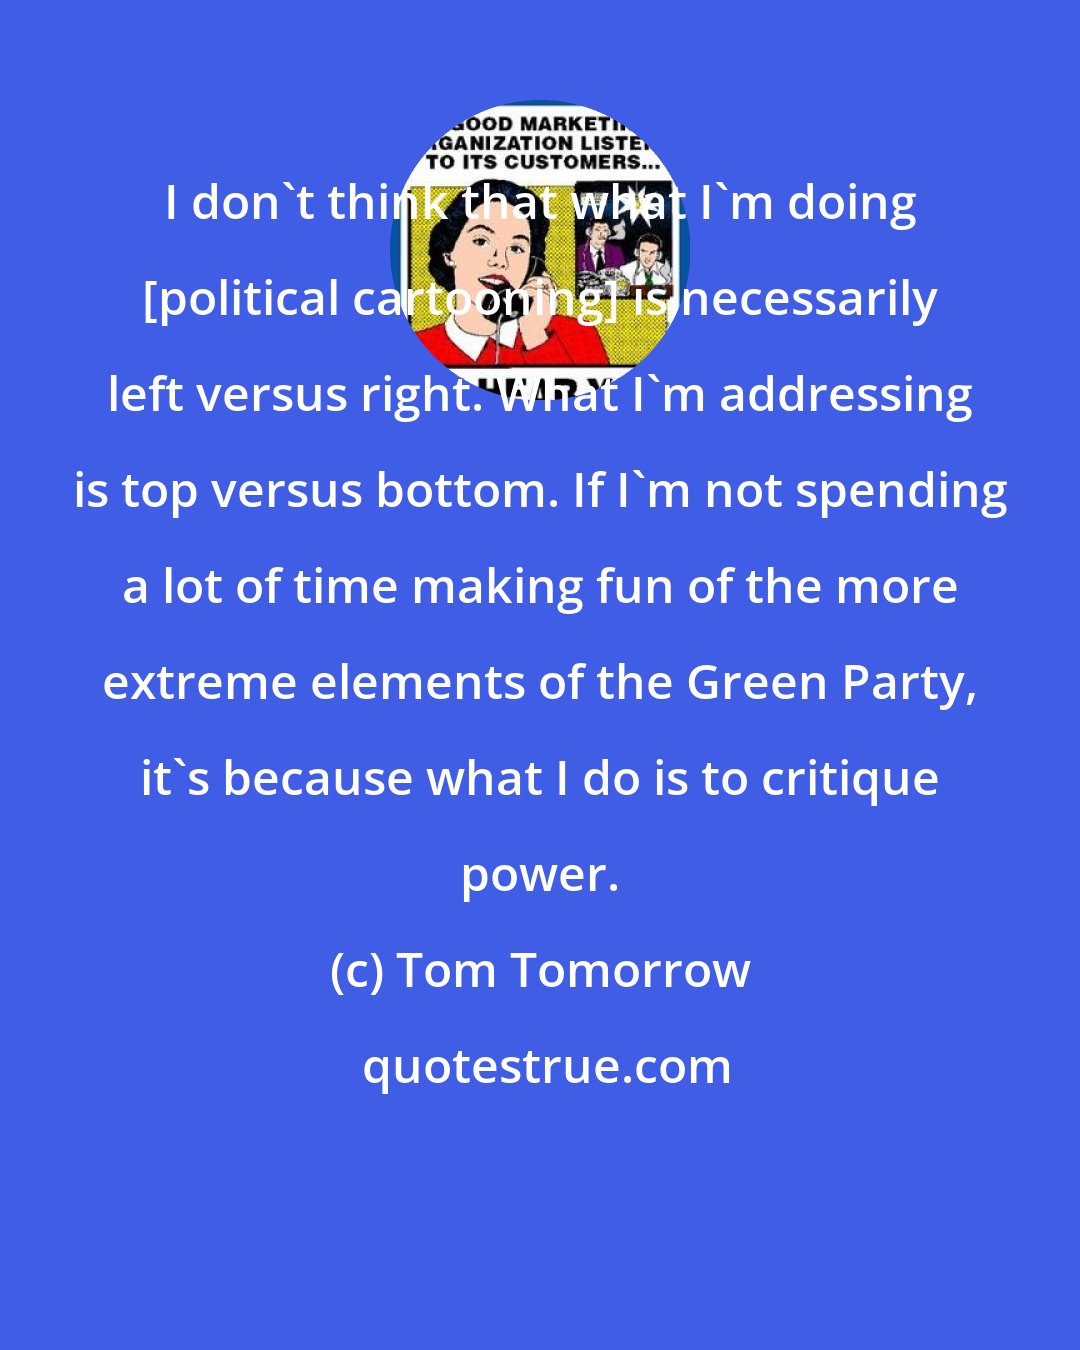 Tom Tomorrow: I don't think that what I'm doing [political cartooning] is necessarily left versus right. What I'm addressing is top versus bottom. If I'm not spending a lot of time making fun of the more extreme elements of the Green Party, it's because what I do is to critique power.